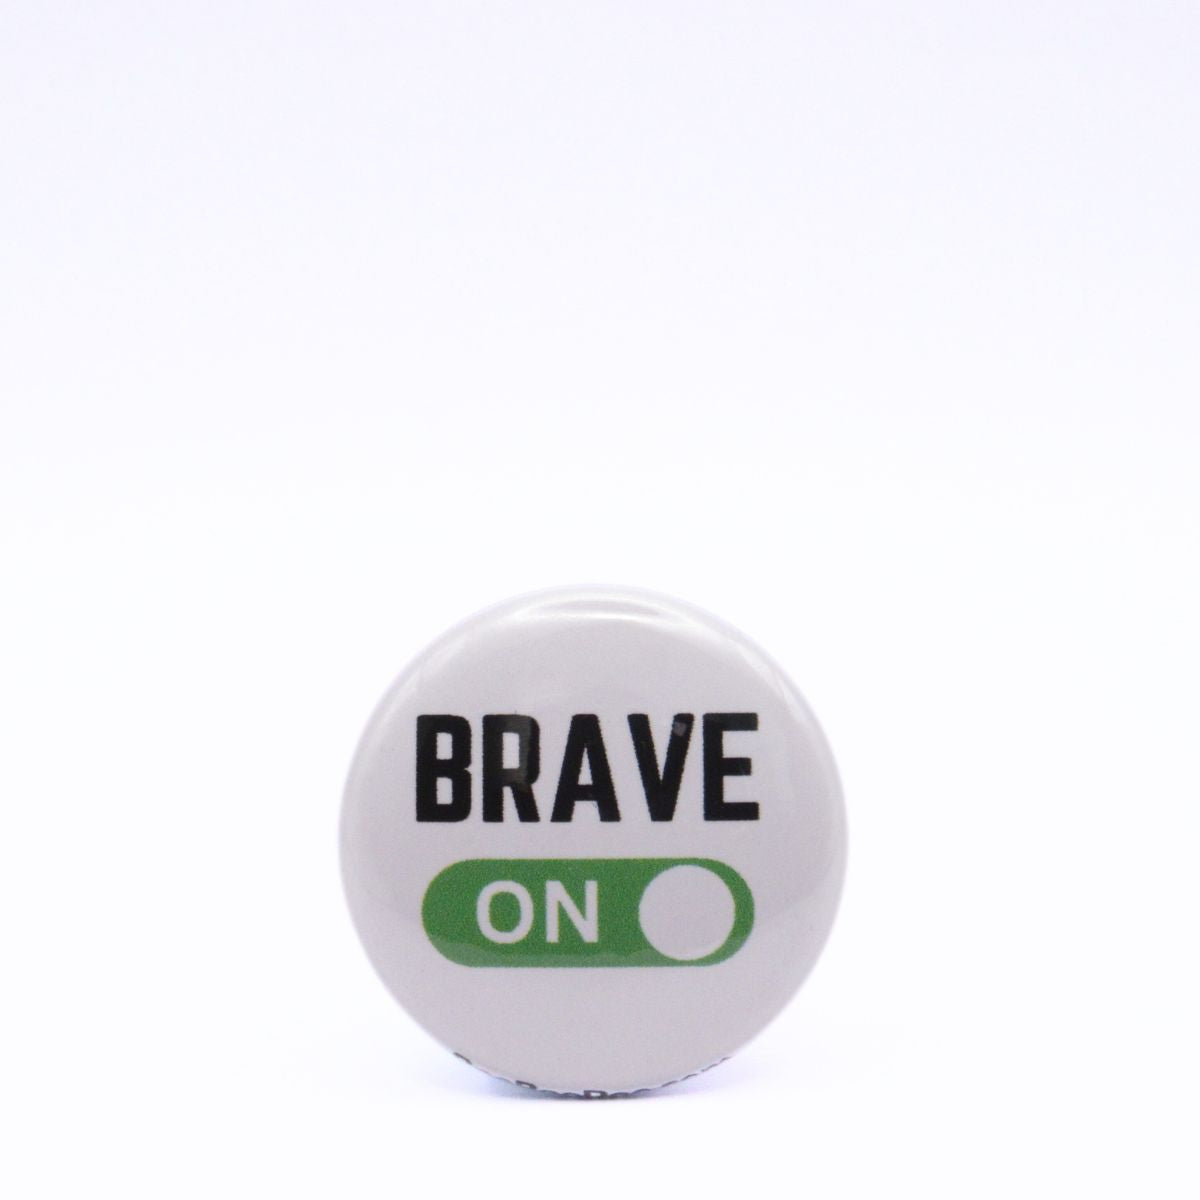 BooBooRoo Pinback Button (i.e. button, badge, pin) displaying brave mode is on. Green background for mode indicator.